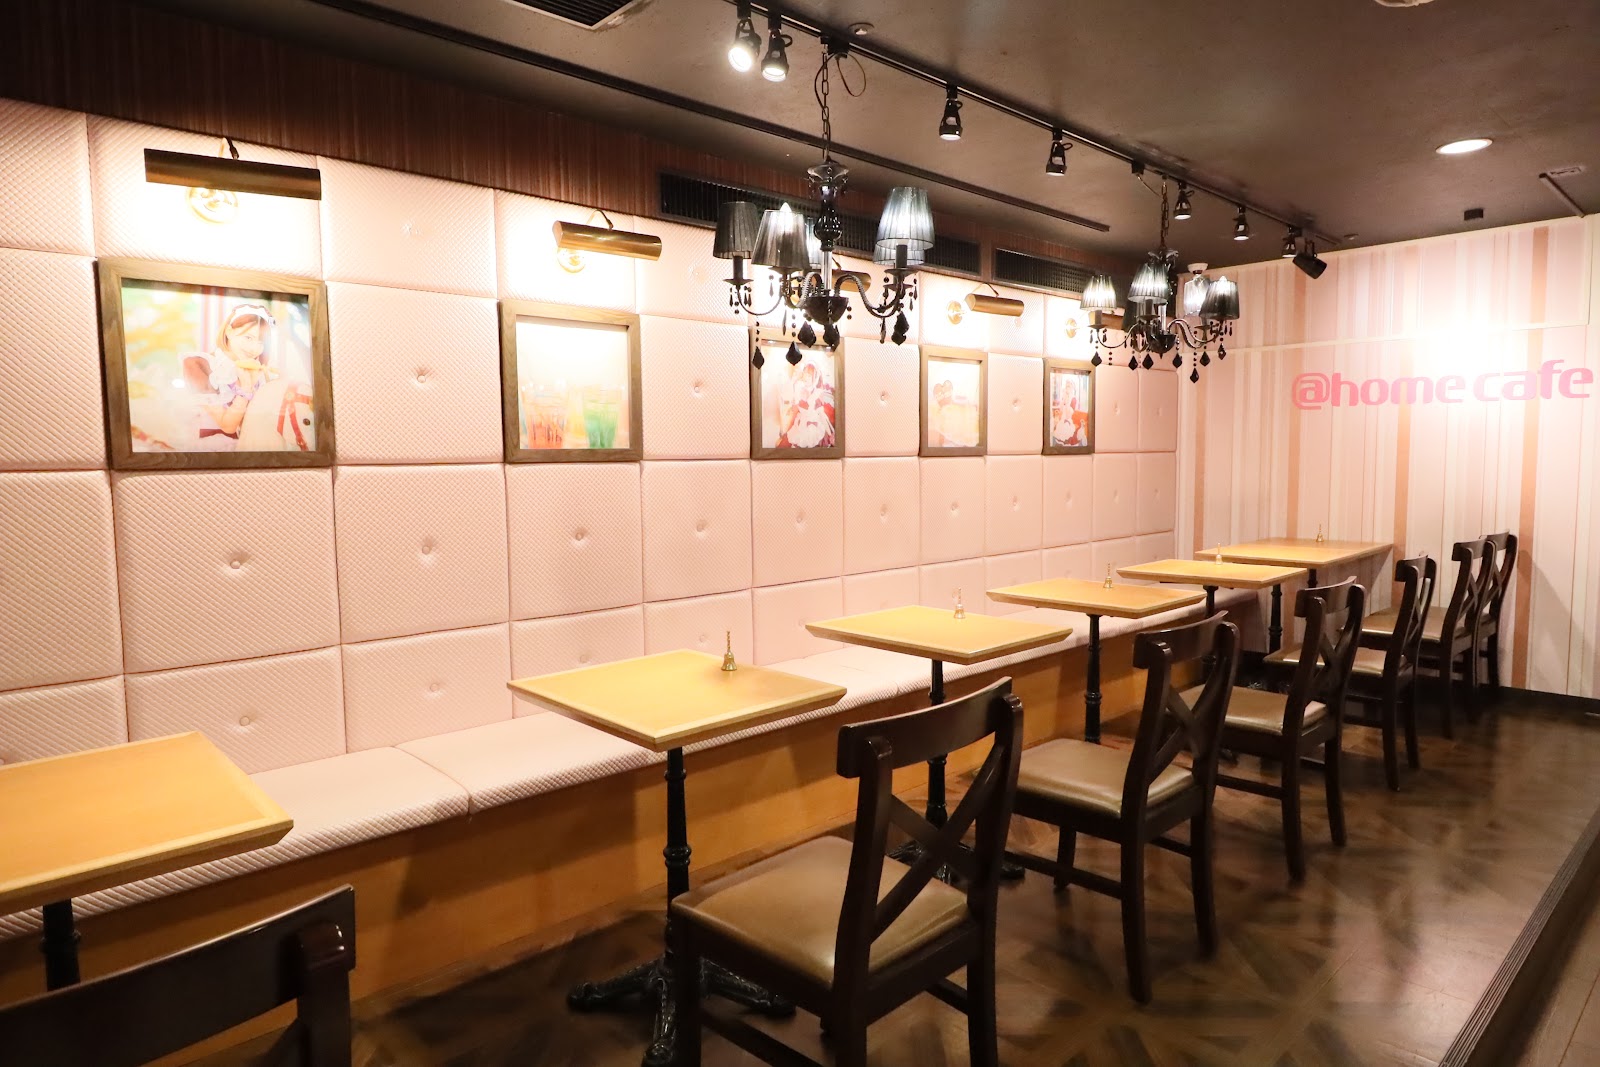 at-home cafe ドンキ店（あっとほぉーむカフェ）の風景